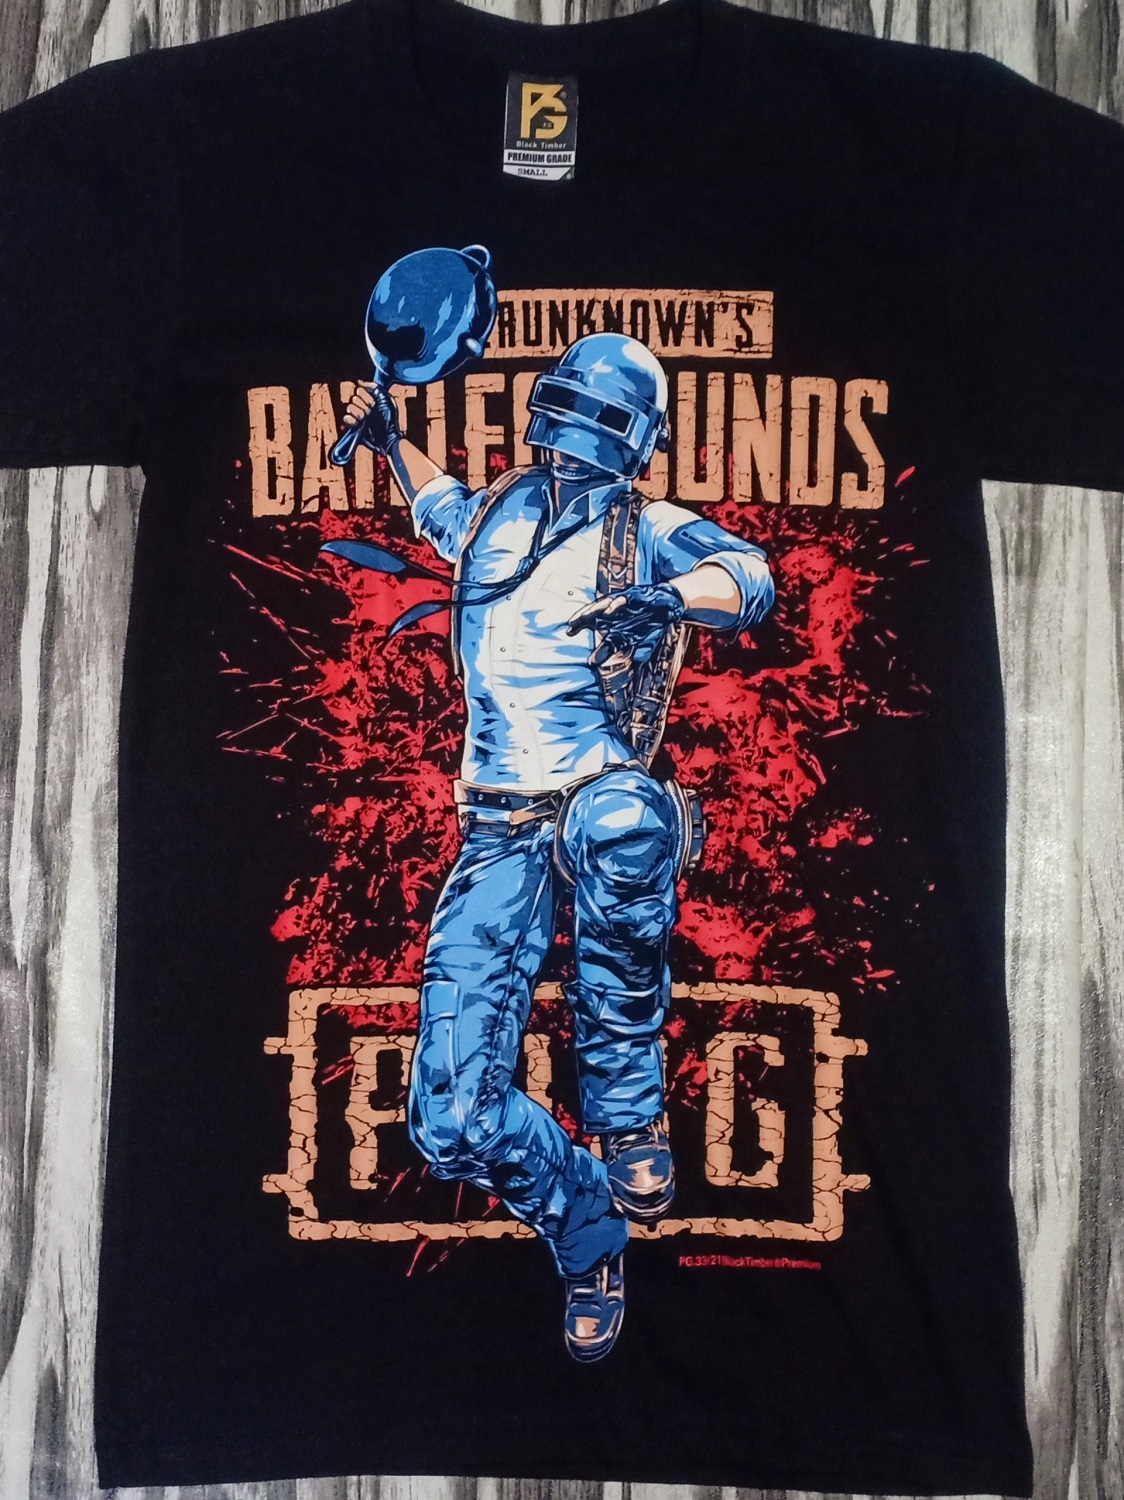 PG33 PUBG PLAYER UNKNOWNS BATTLEGROUNDS PAN HITTERS GAMERS COLLECTION  ORIGINAL PREMIUM GRADE BLACK TIMBER COTTON T-SHIRT – PREMIUM GRADE BLACK  TIMBER NEW TYPE SYSTEM MOAI SPEED HIGH QUALITY SILK SCREEN COLLECTABLE T- SHIRT